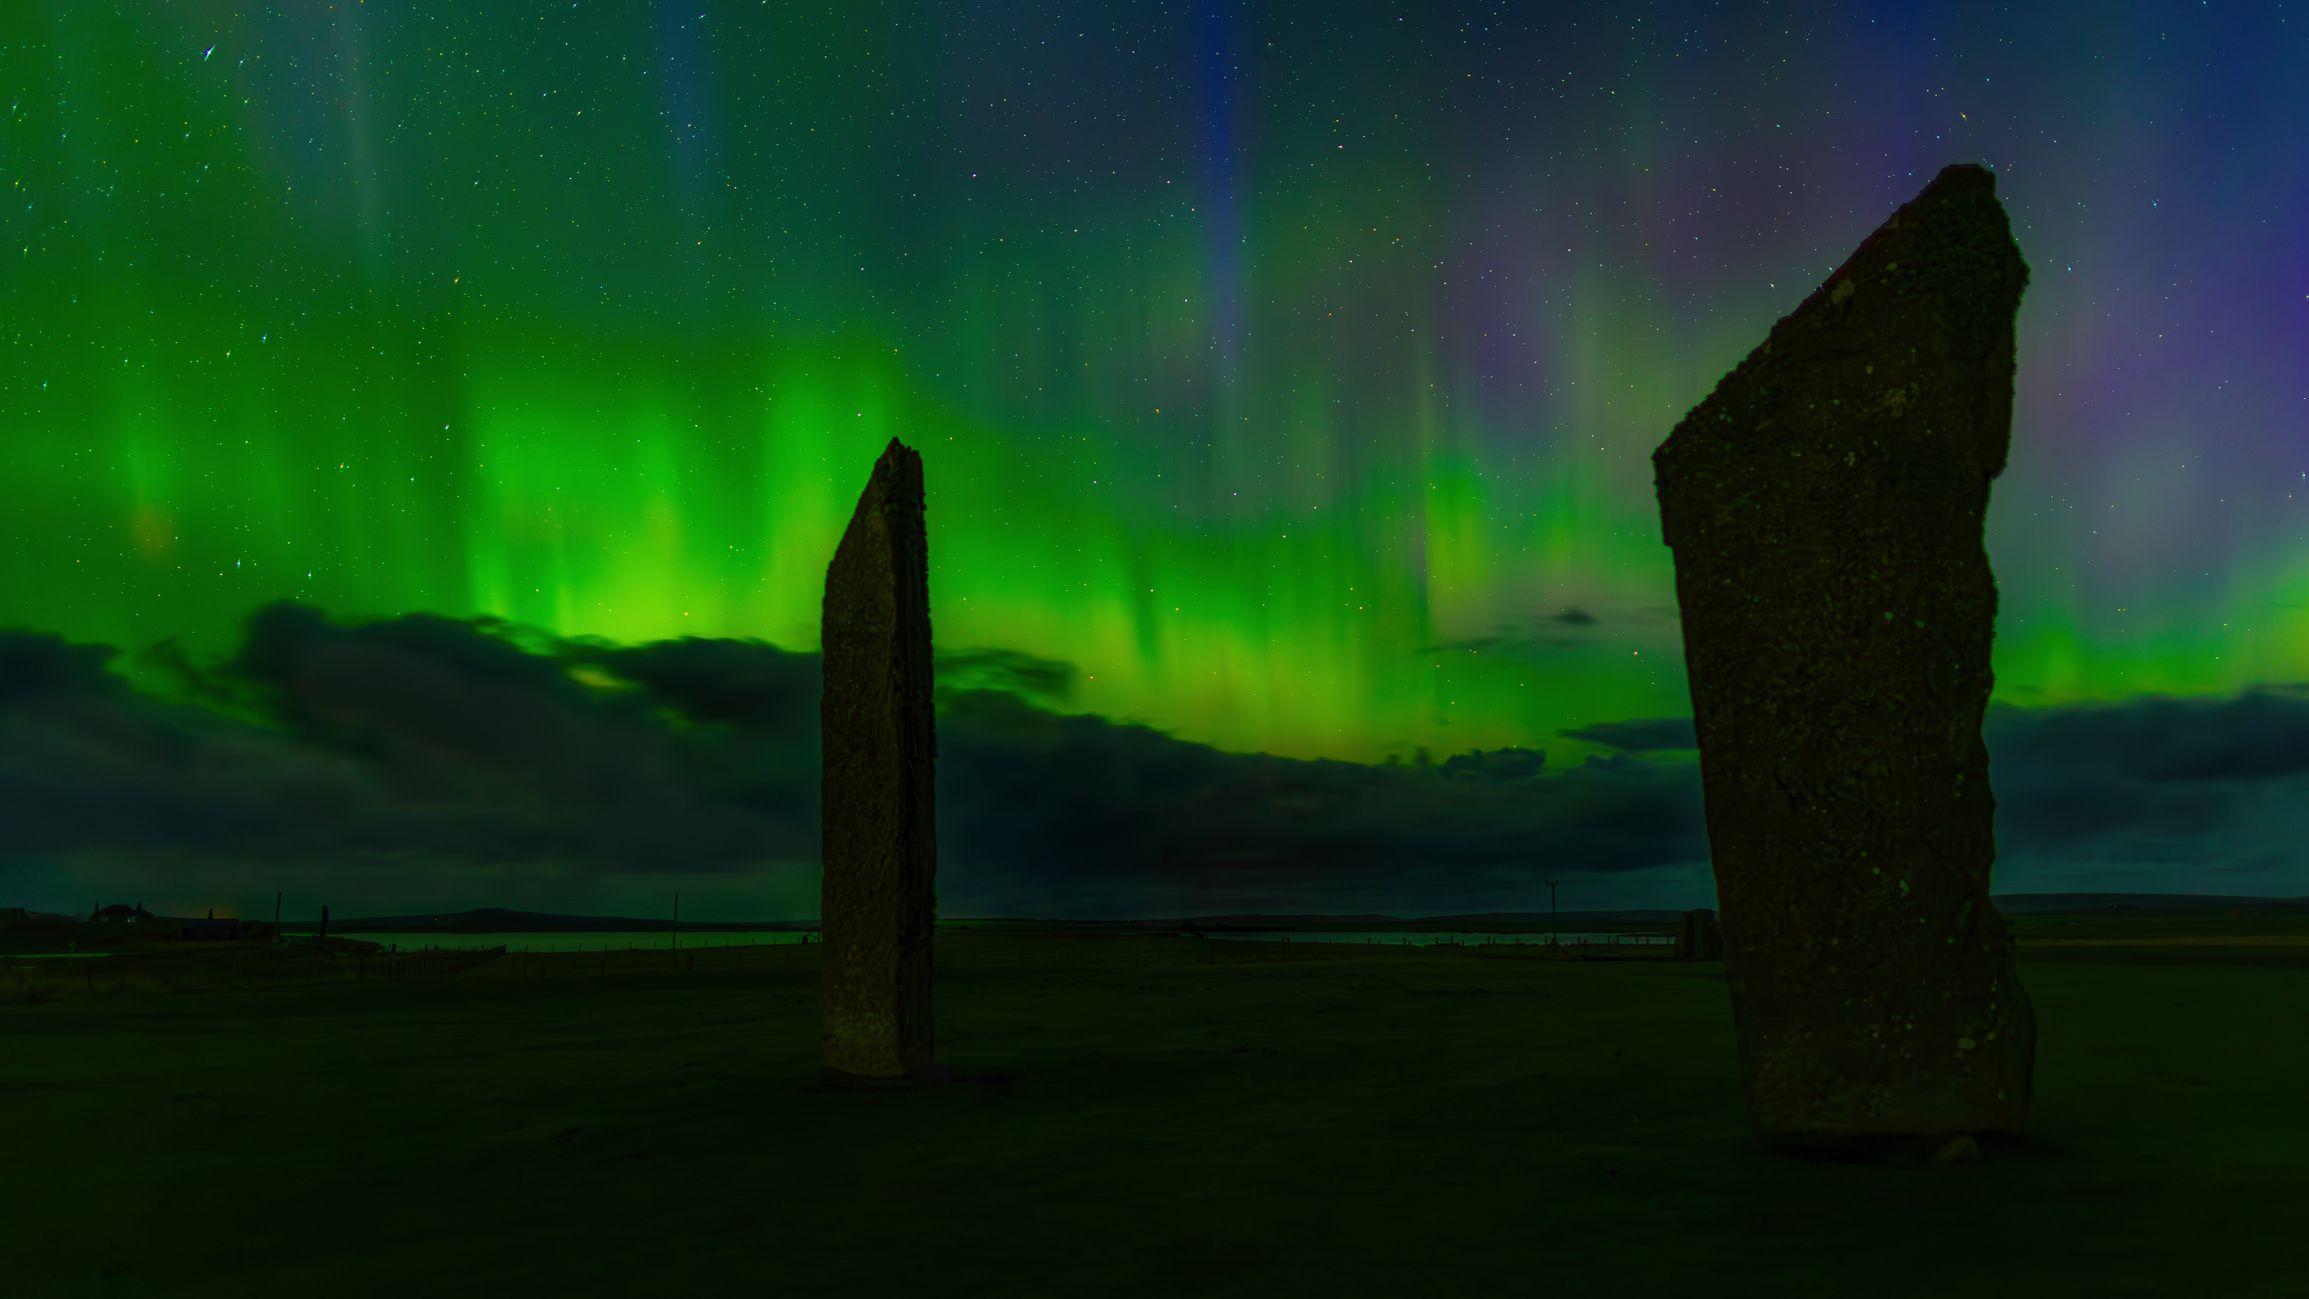 More Northern Lights soon as Sun storms strengthen